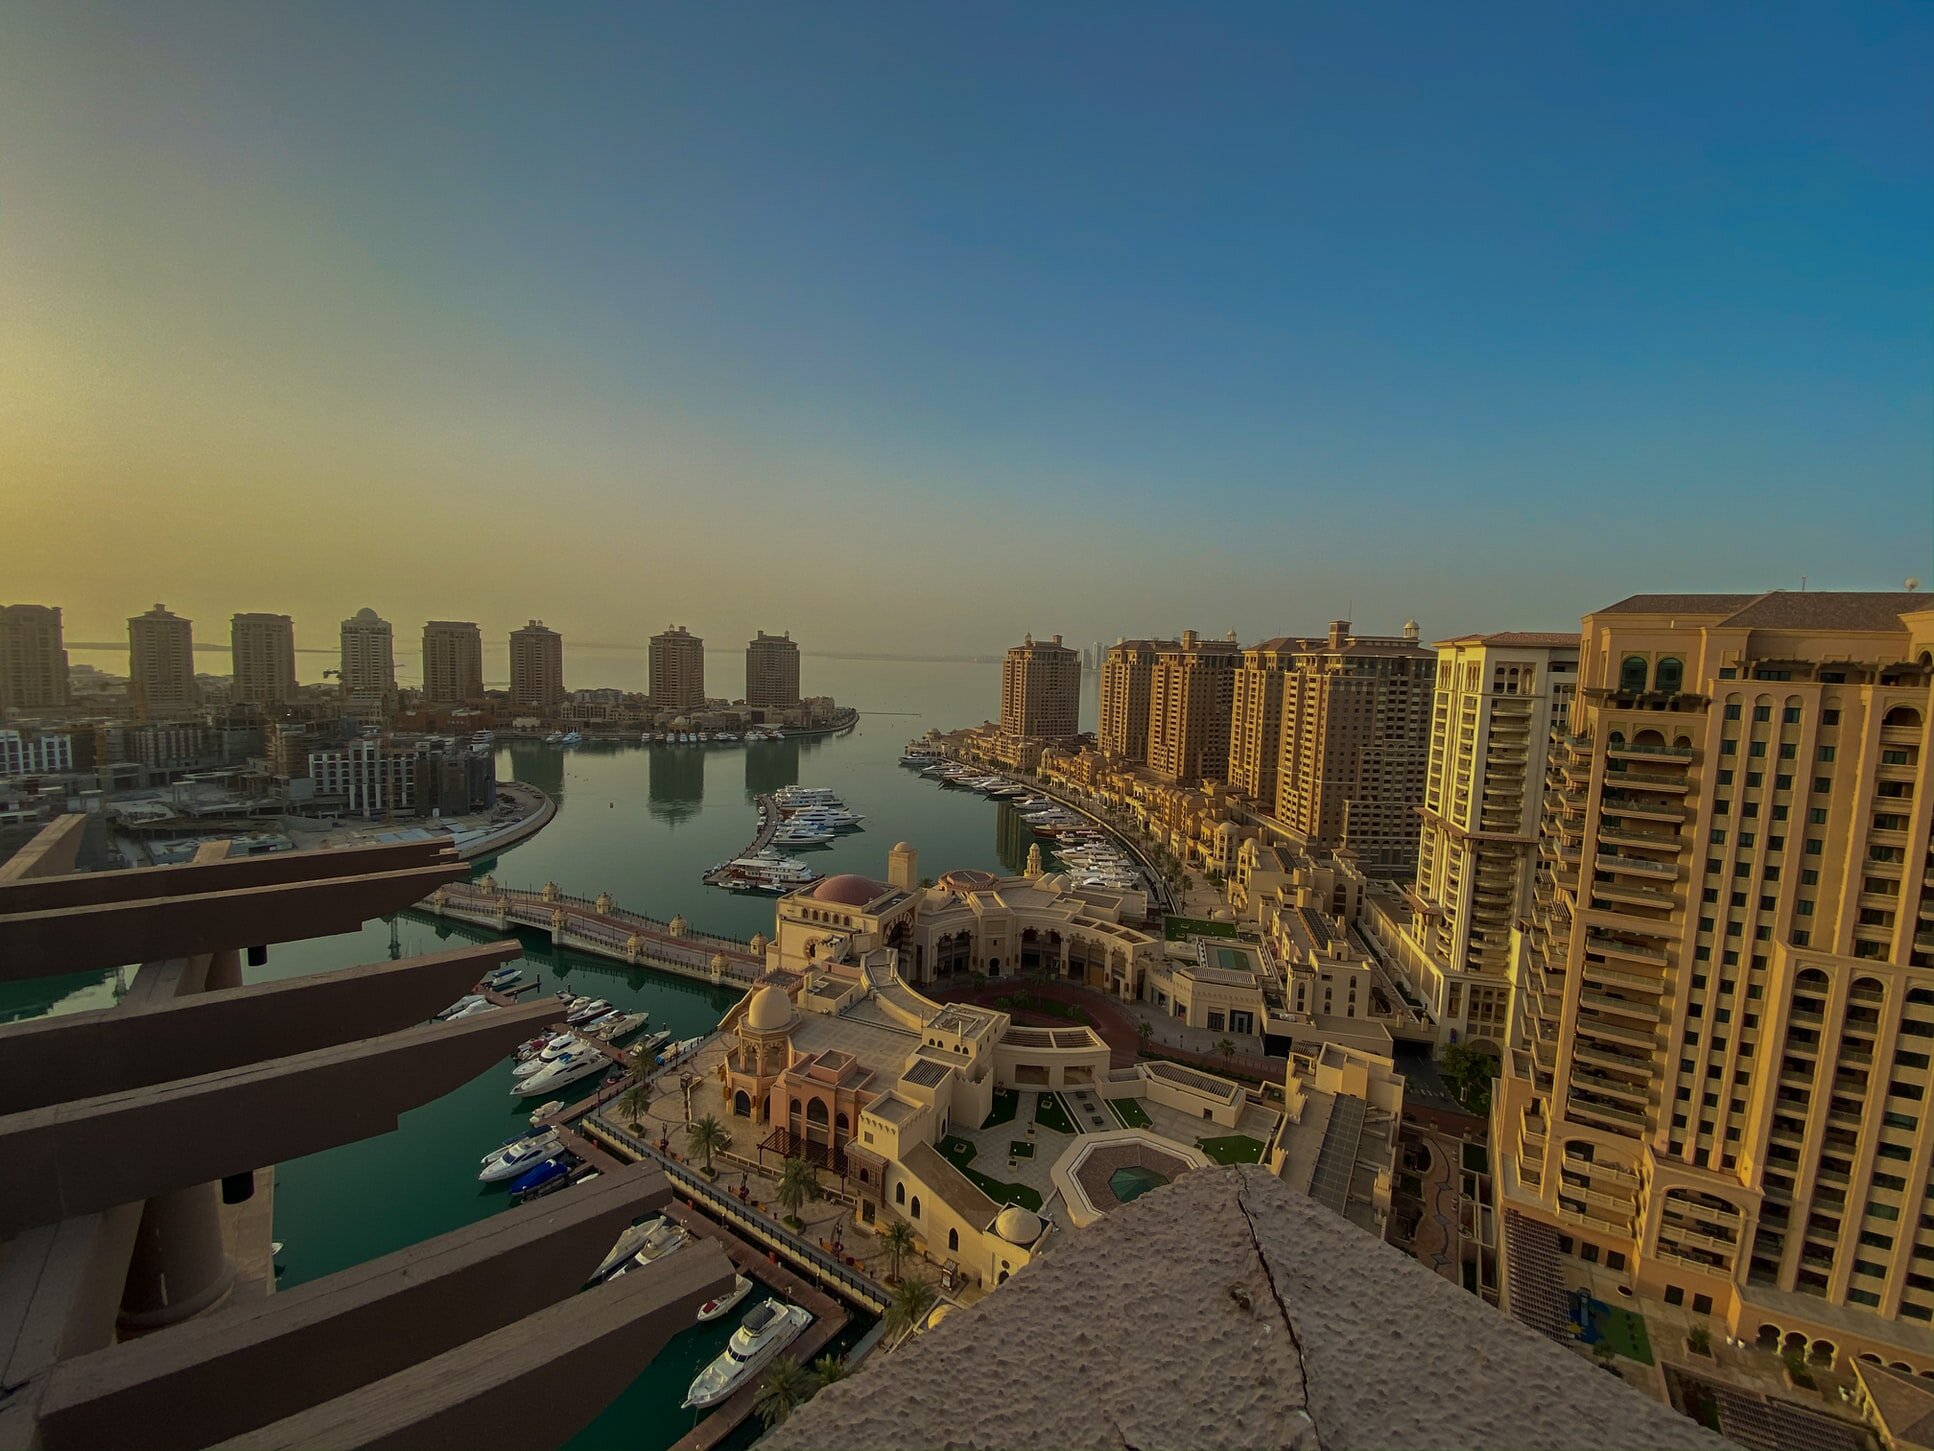 An Expat’s Guide to Living in Doha, Qatar